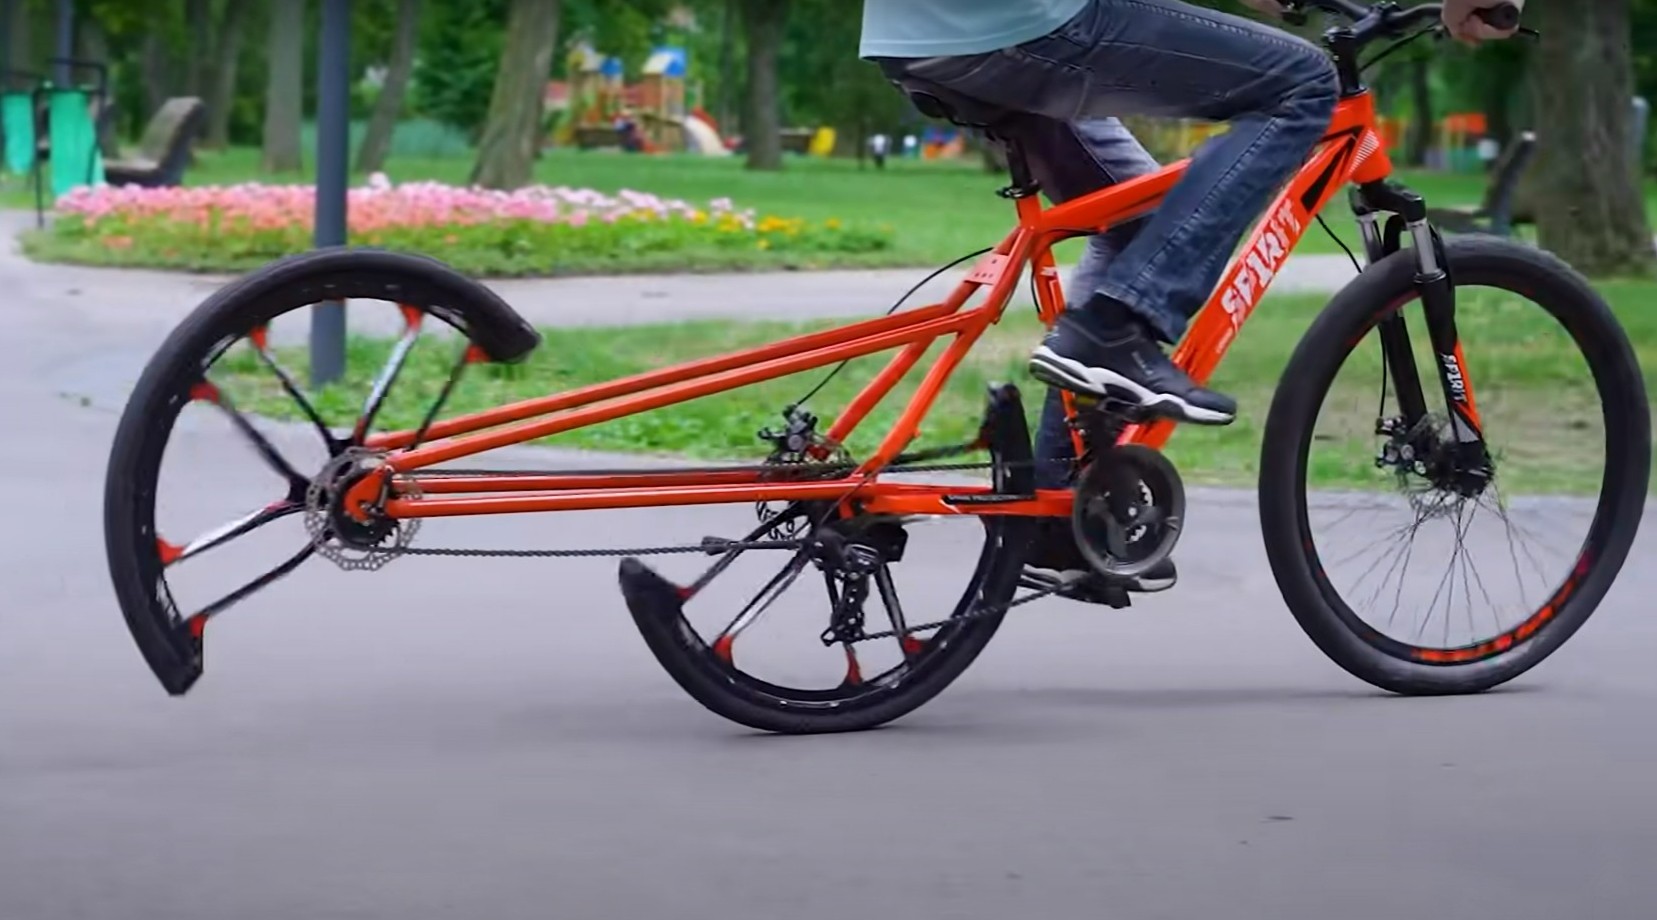 the wonders of mathematics are responsible for functional one off designs like this bike 2